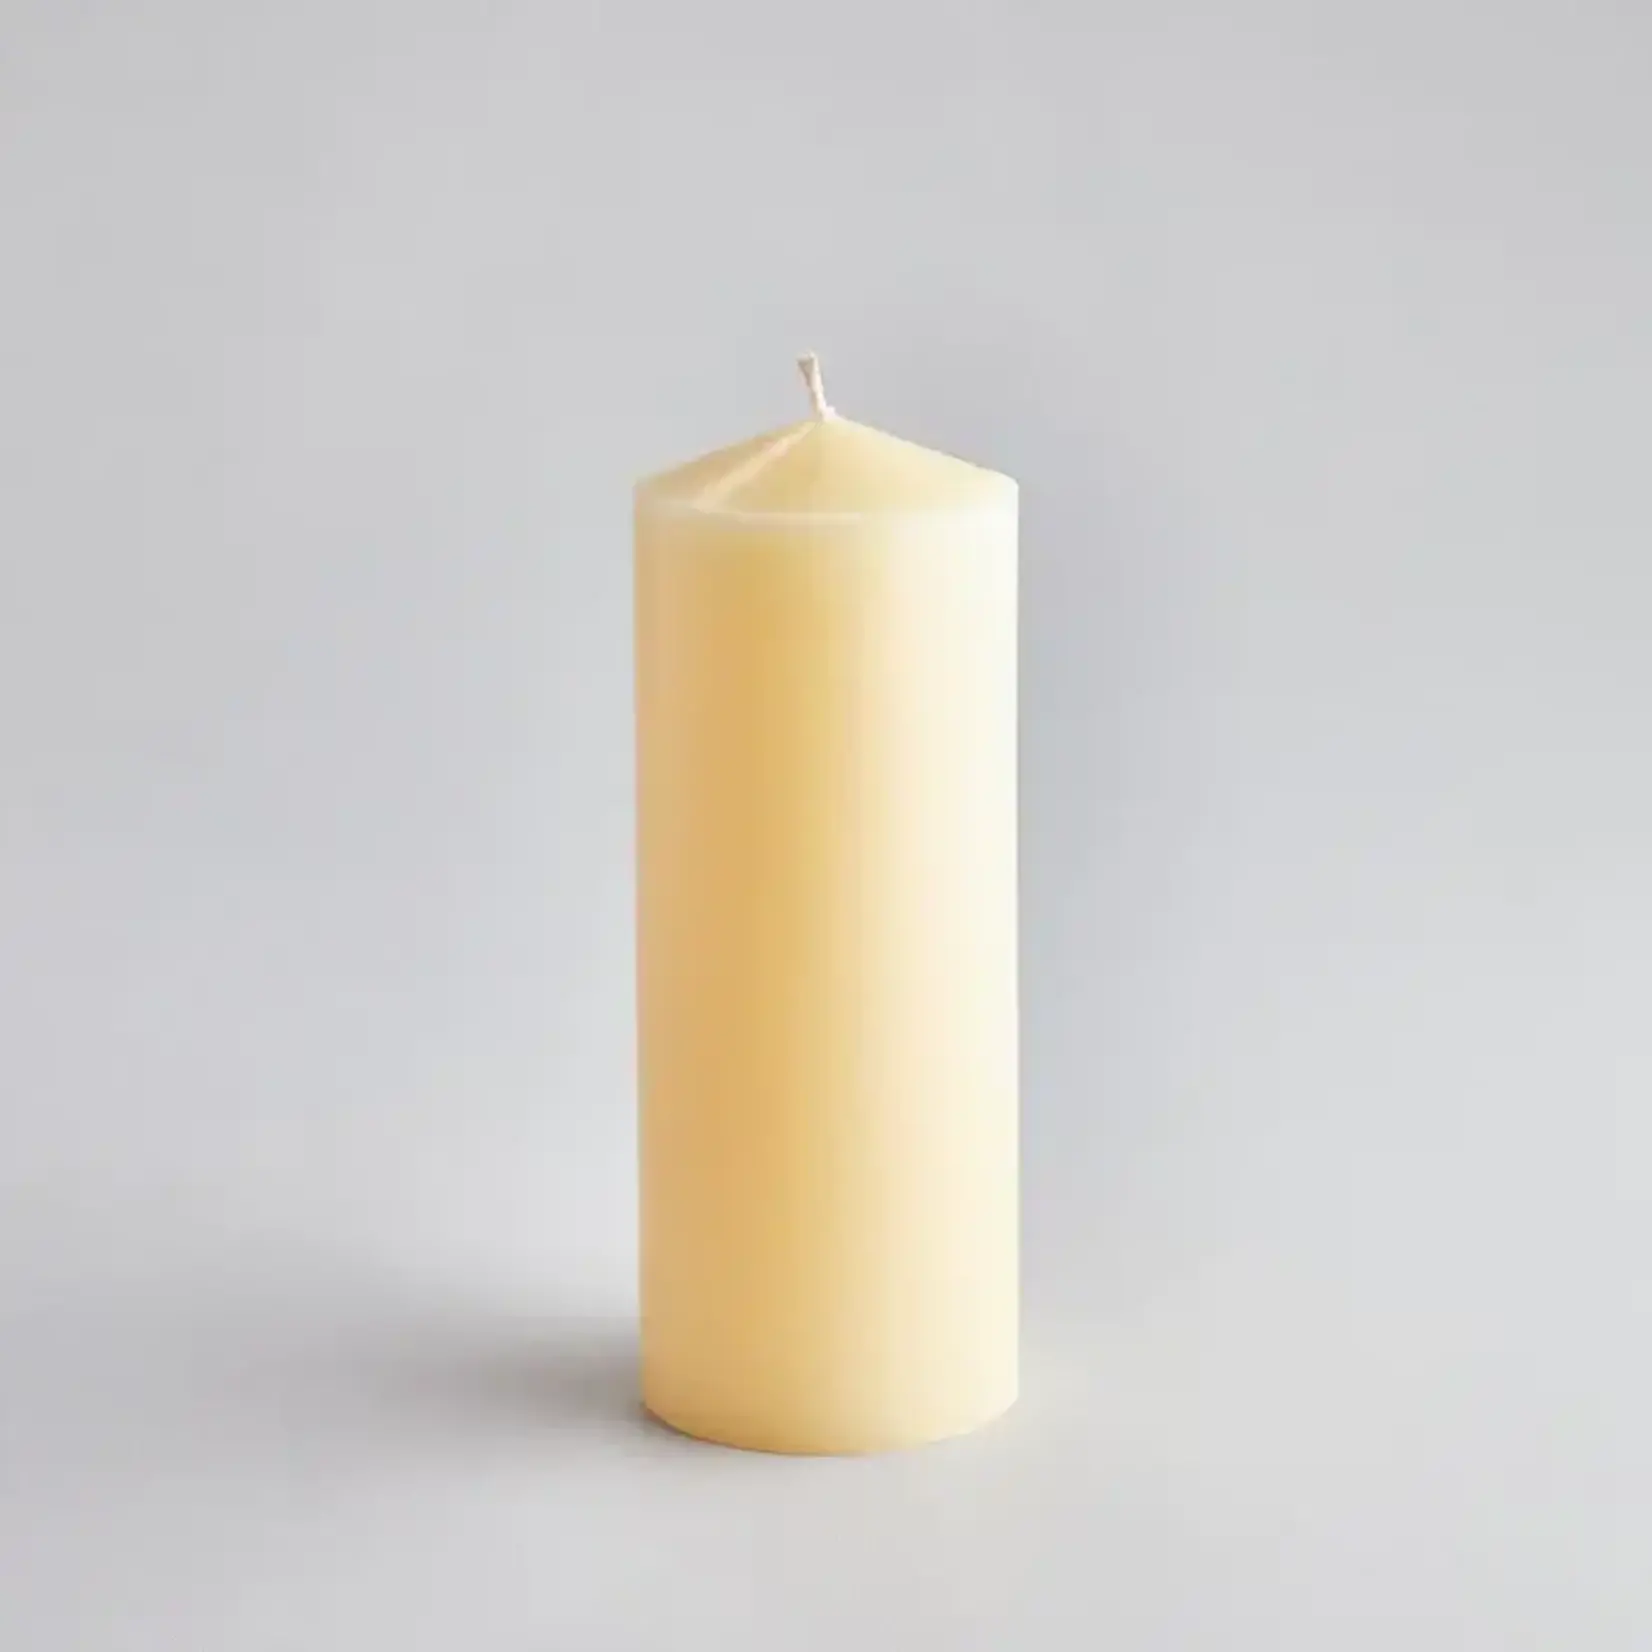 St. Eval 1 x St Eval 3"x8" Church Candle